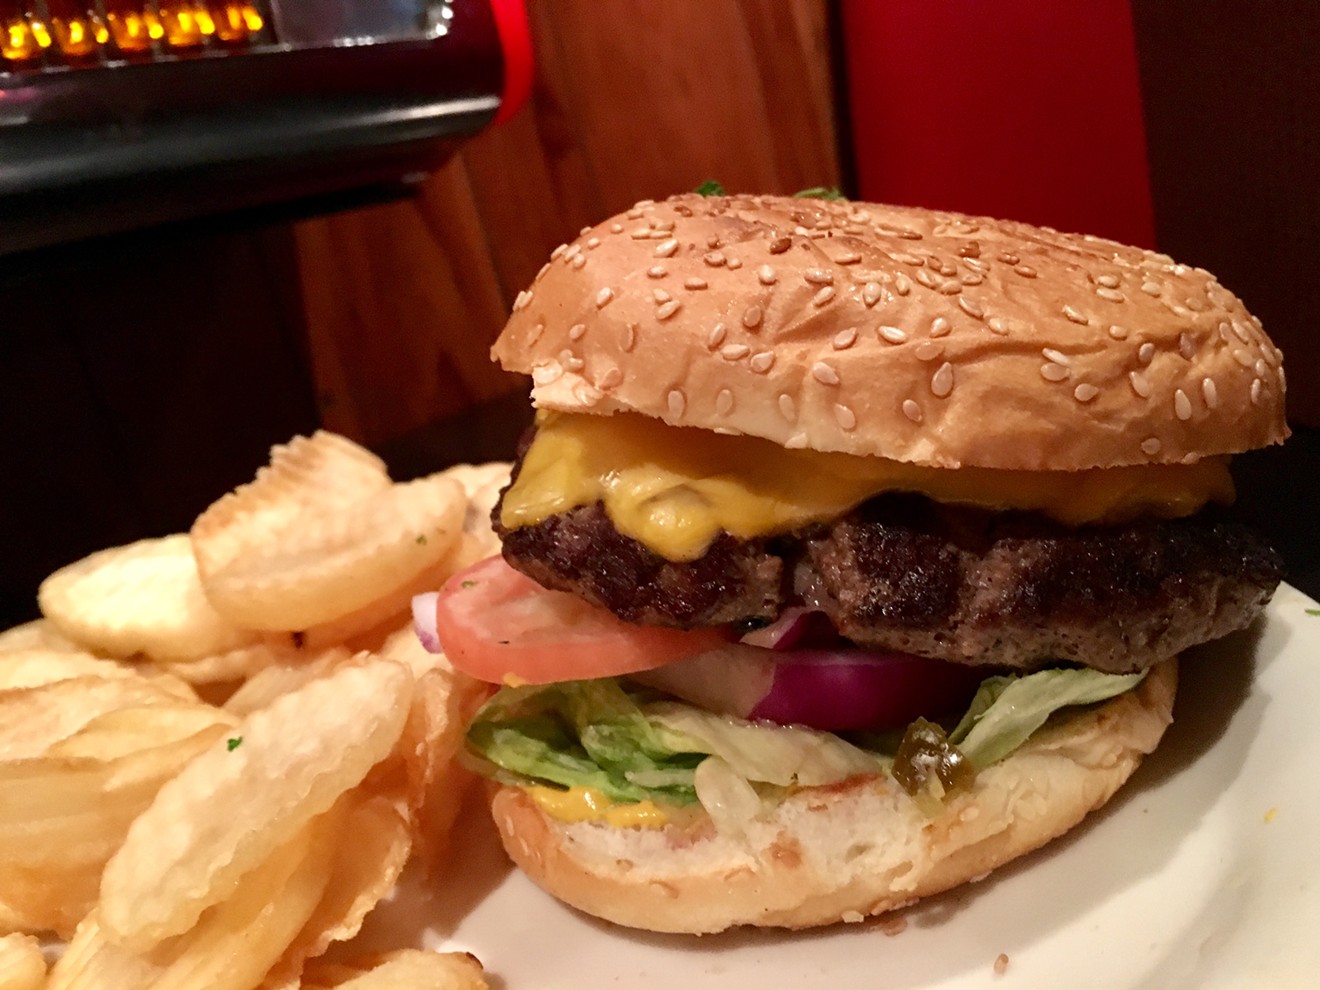 The off-menu burger at Campisi's, with fries, comes to $9.73 with tax.